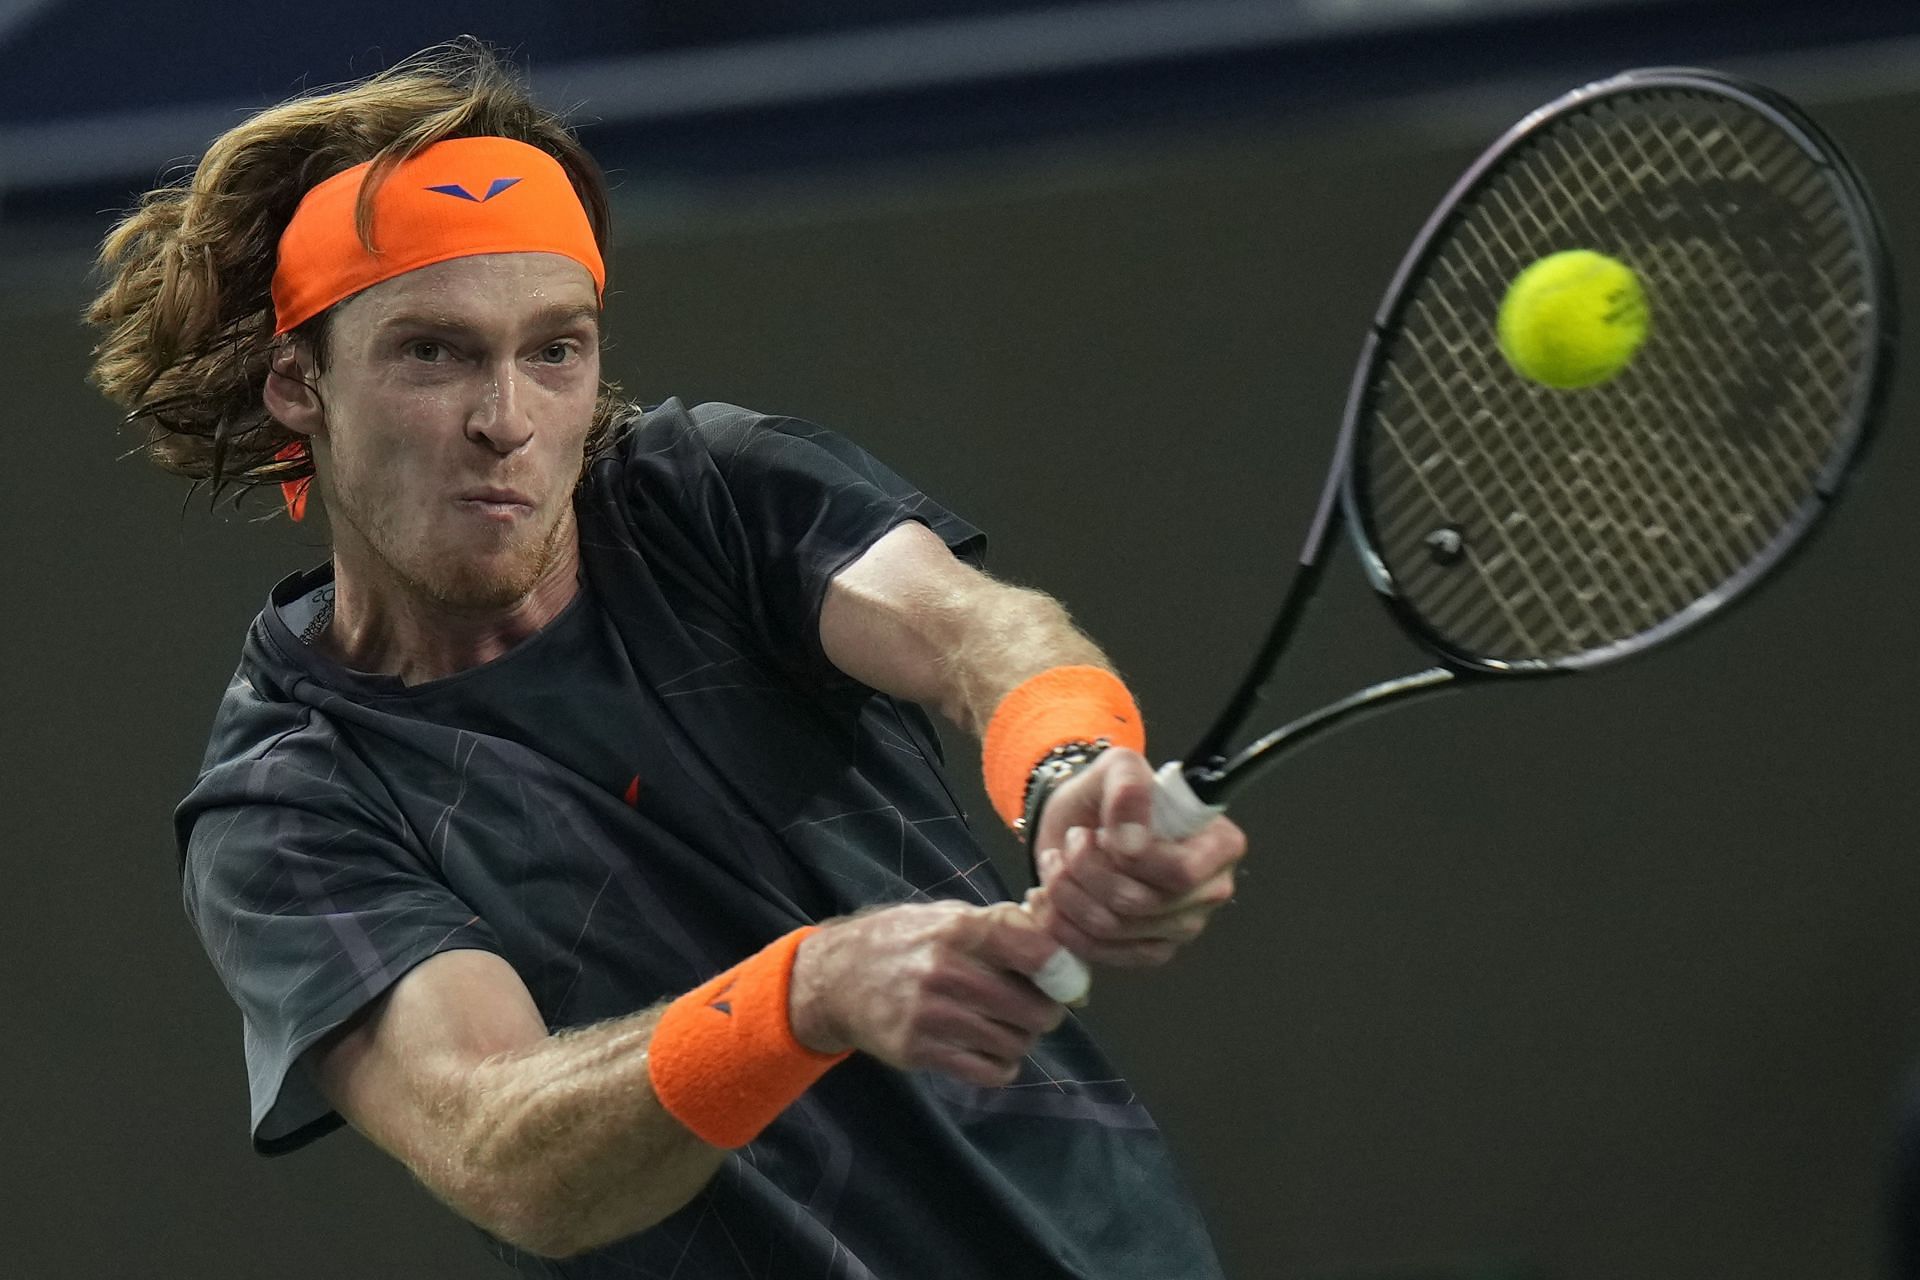 Andrey Rublev in action at the Shanghai Masters